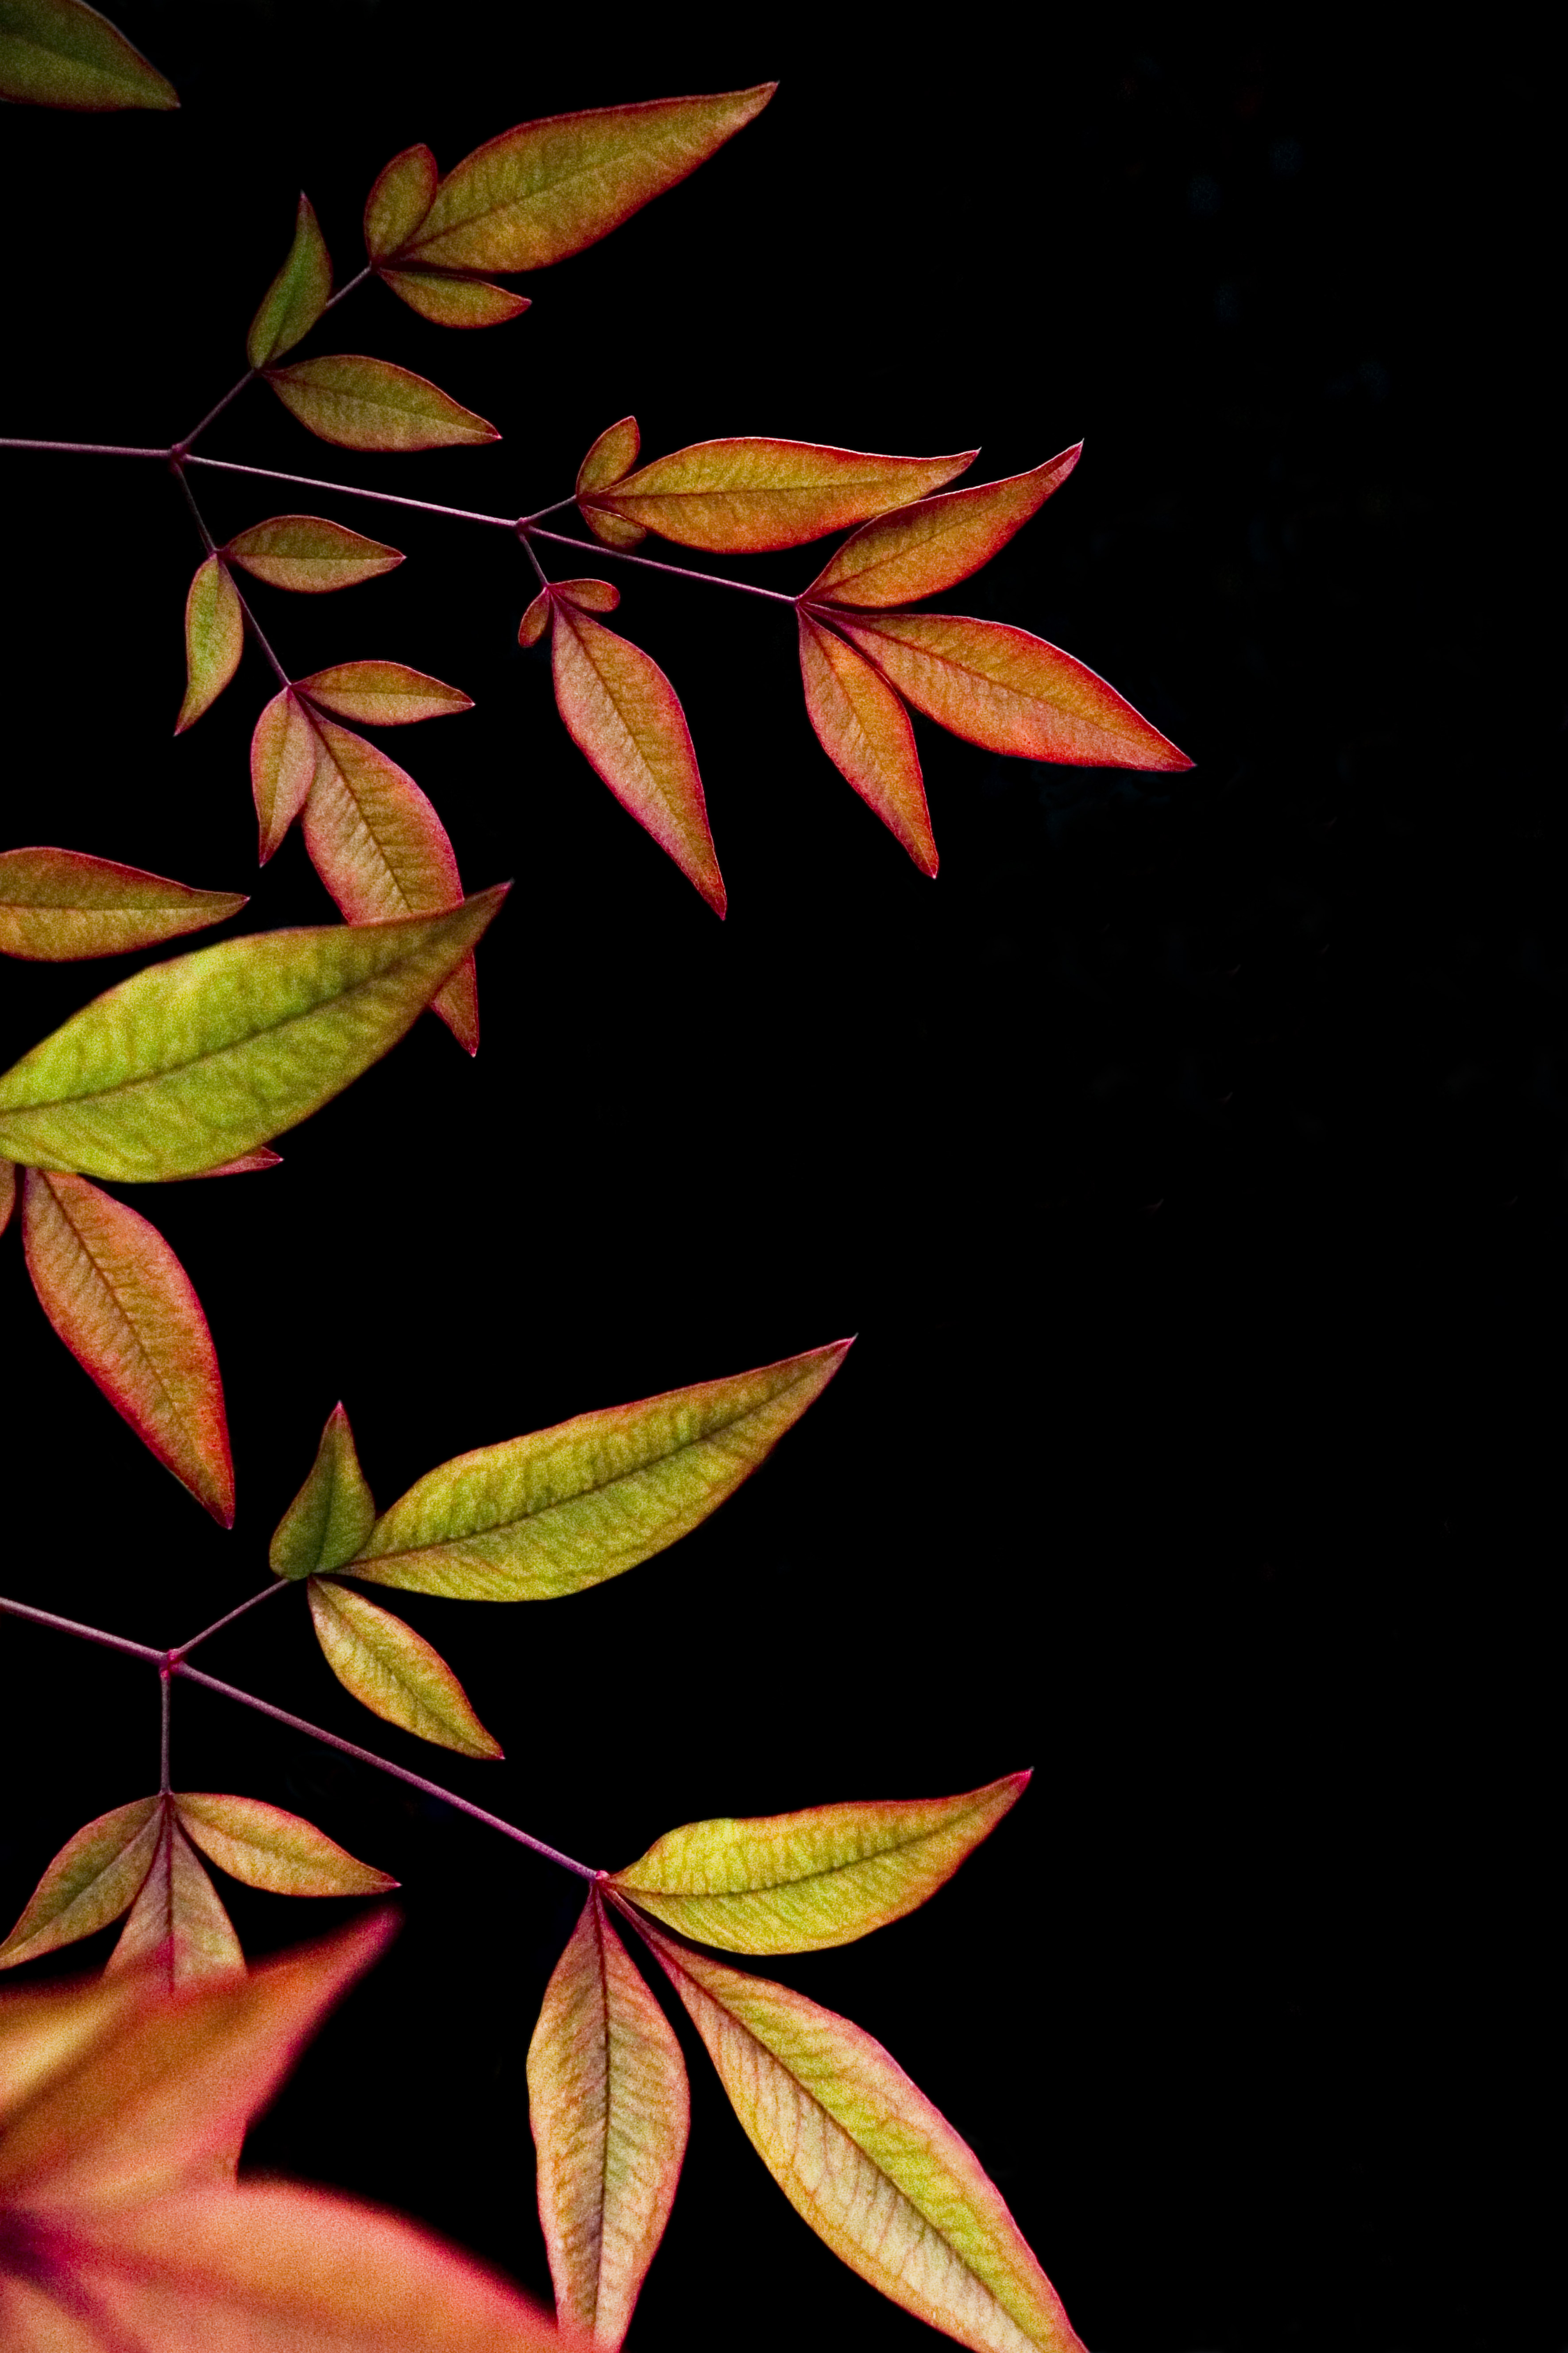 60555 download wallpaper black background, leaves, dark, branch screensavers and pictures for free